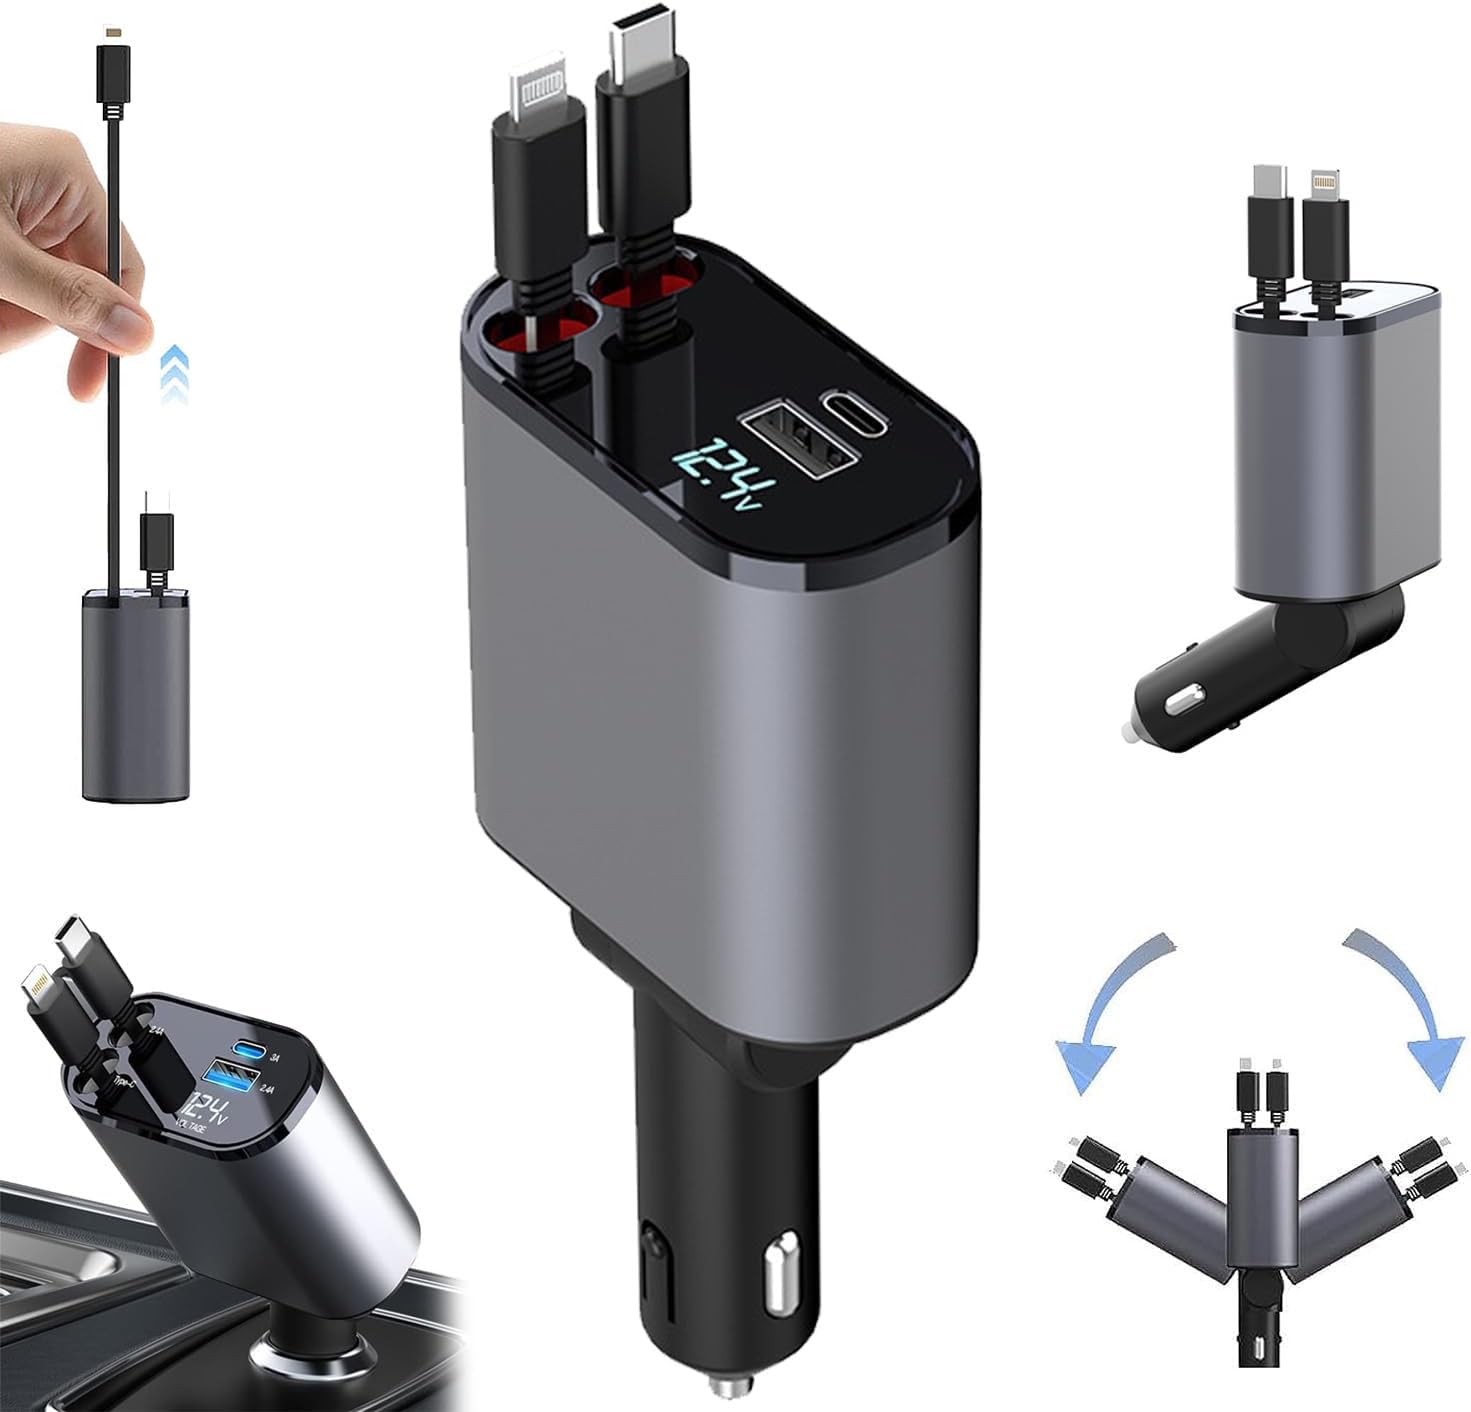 4 In 1 Retractable Car Charger